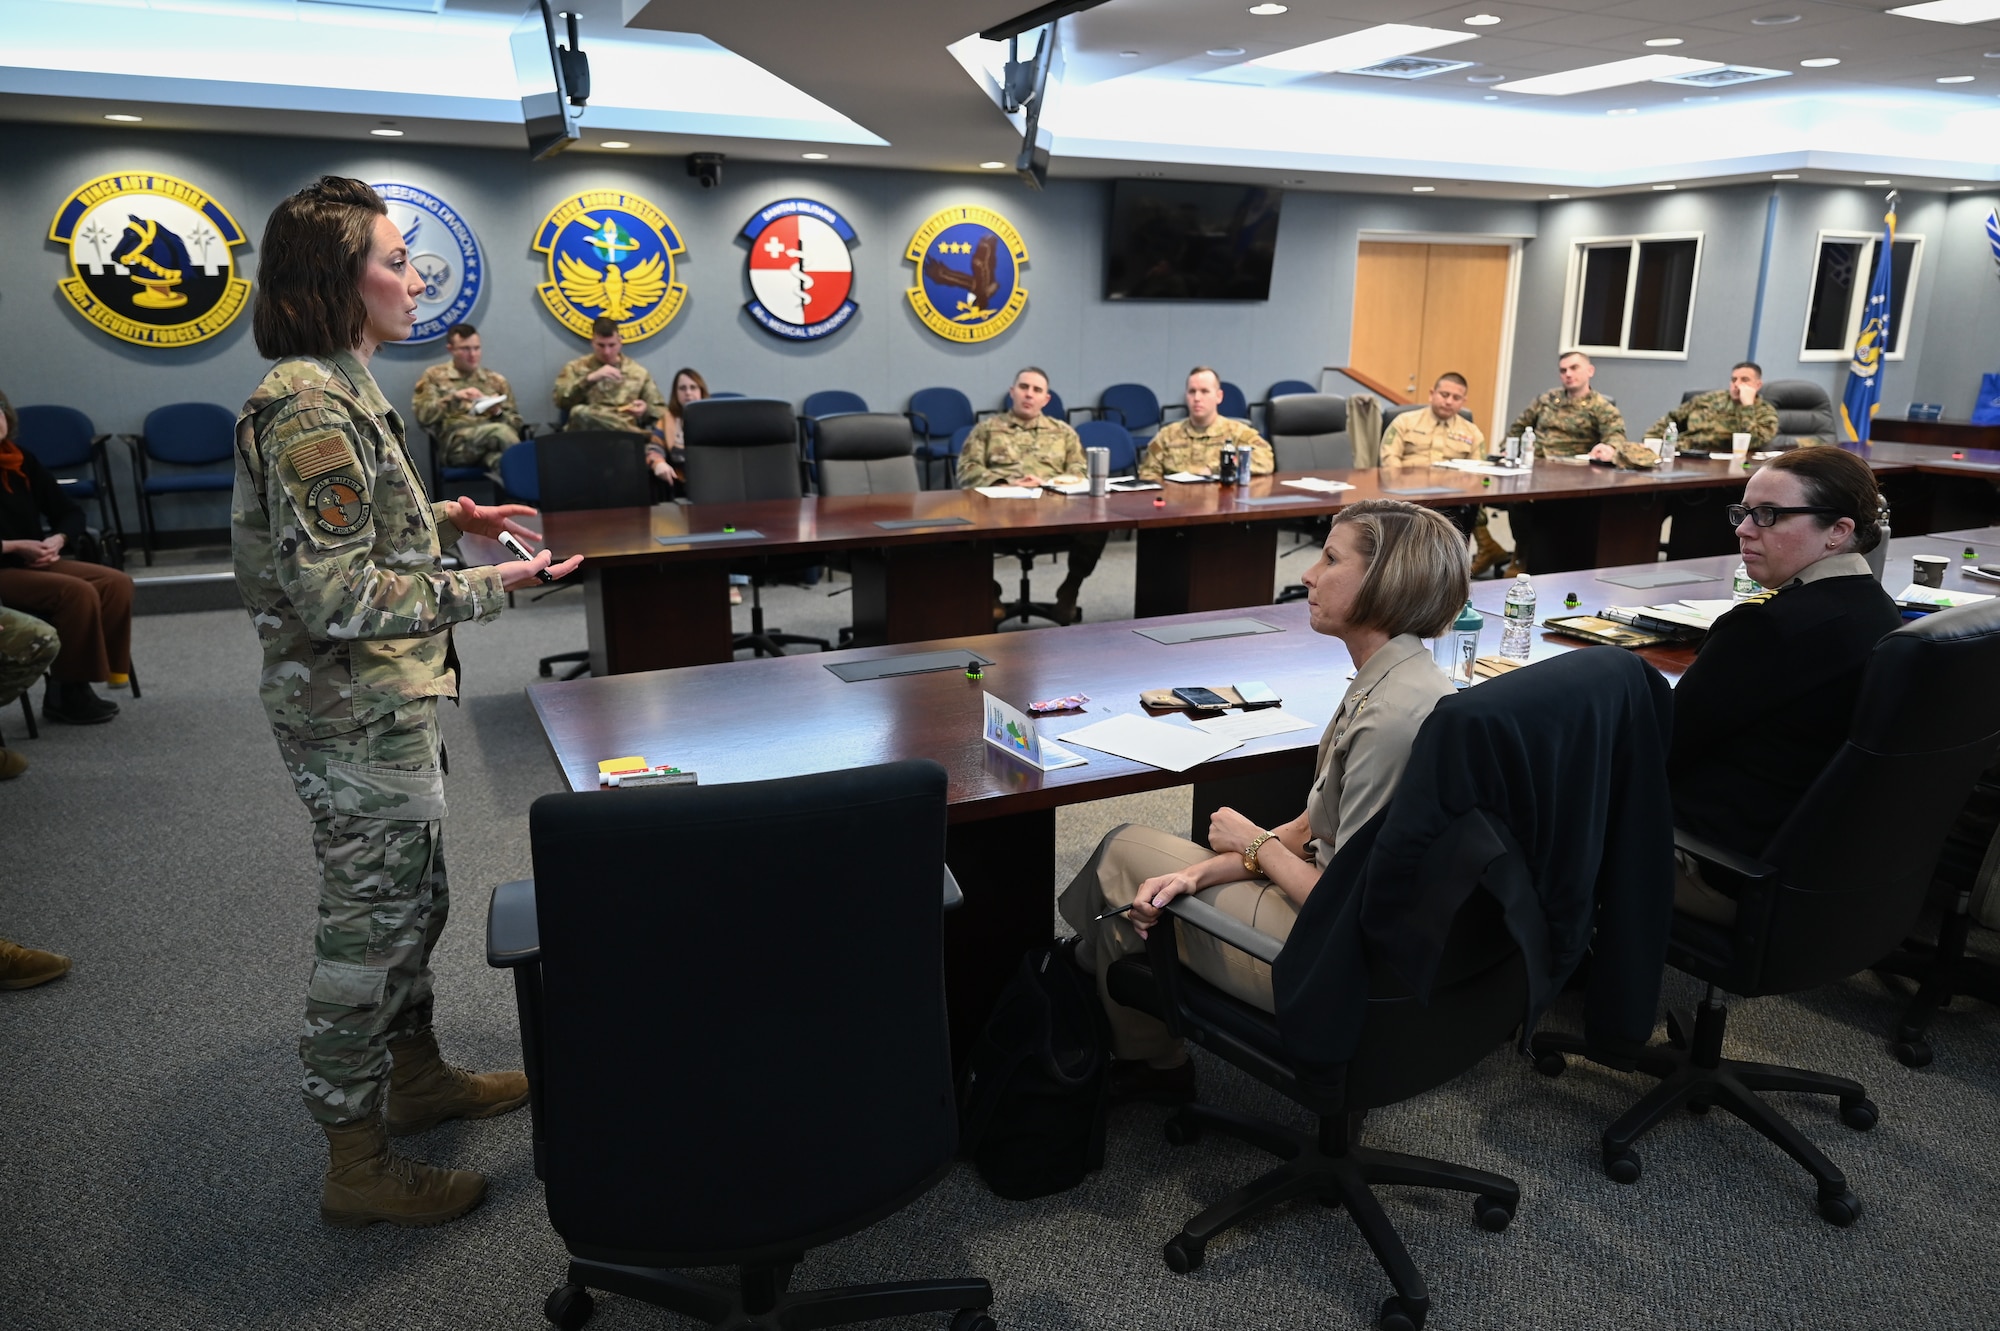 Maj. stands at the front of the room as other military members sit around a horse shoe table.